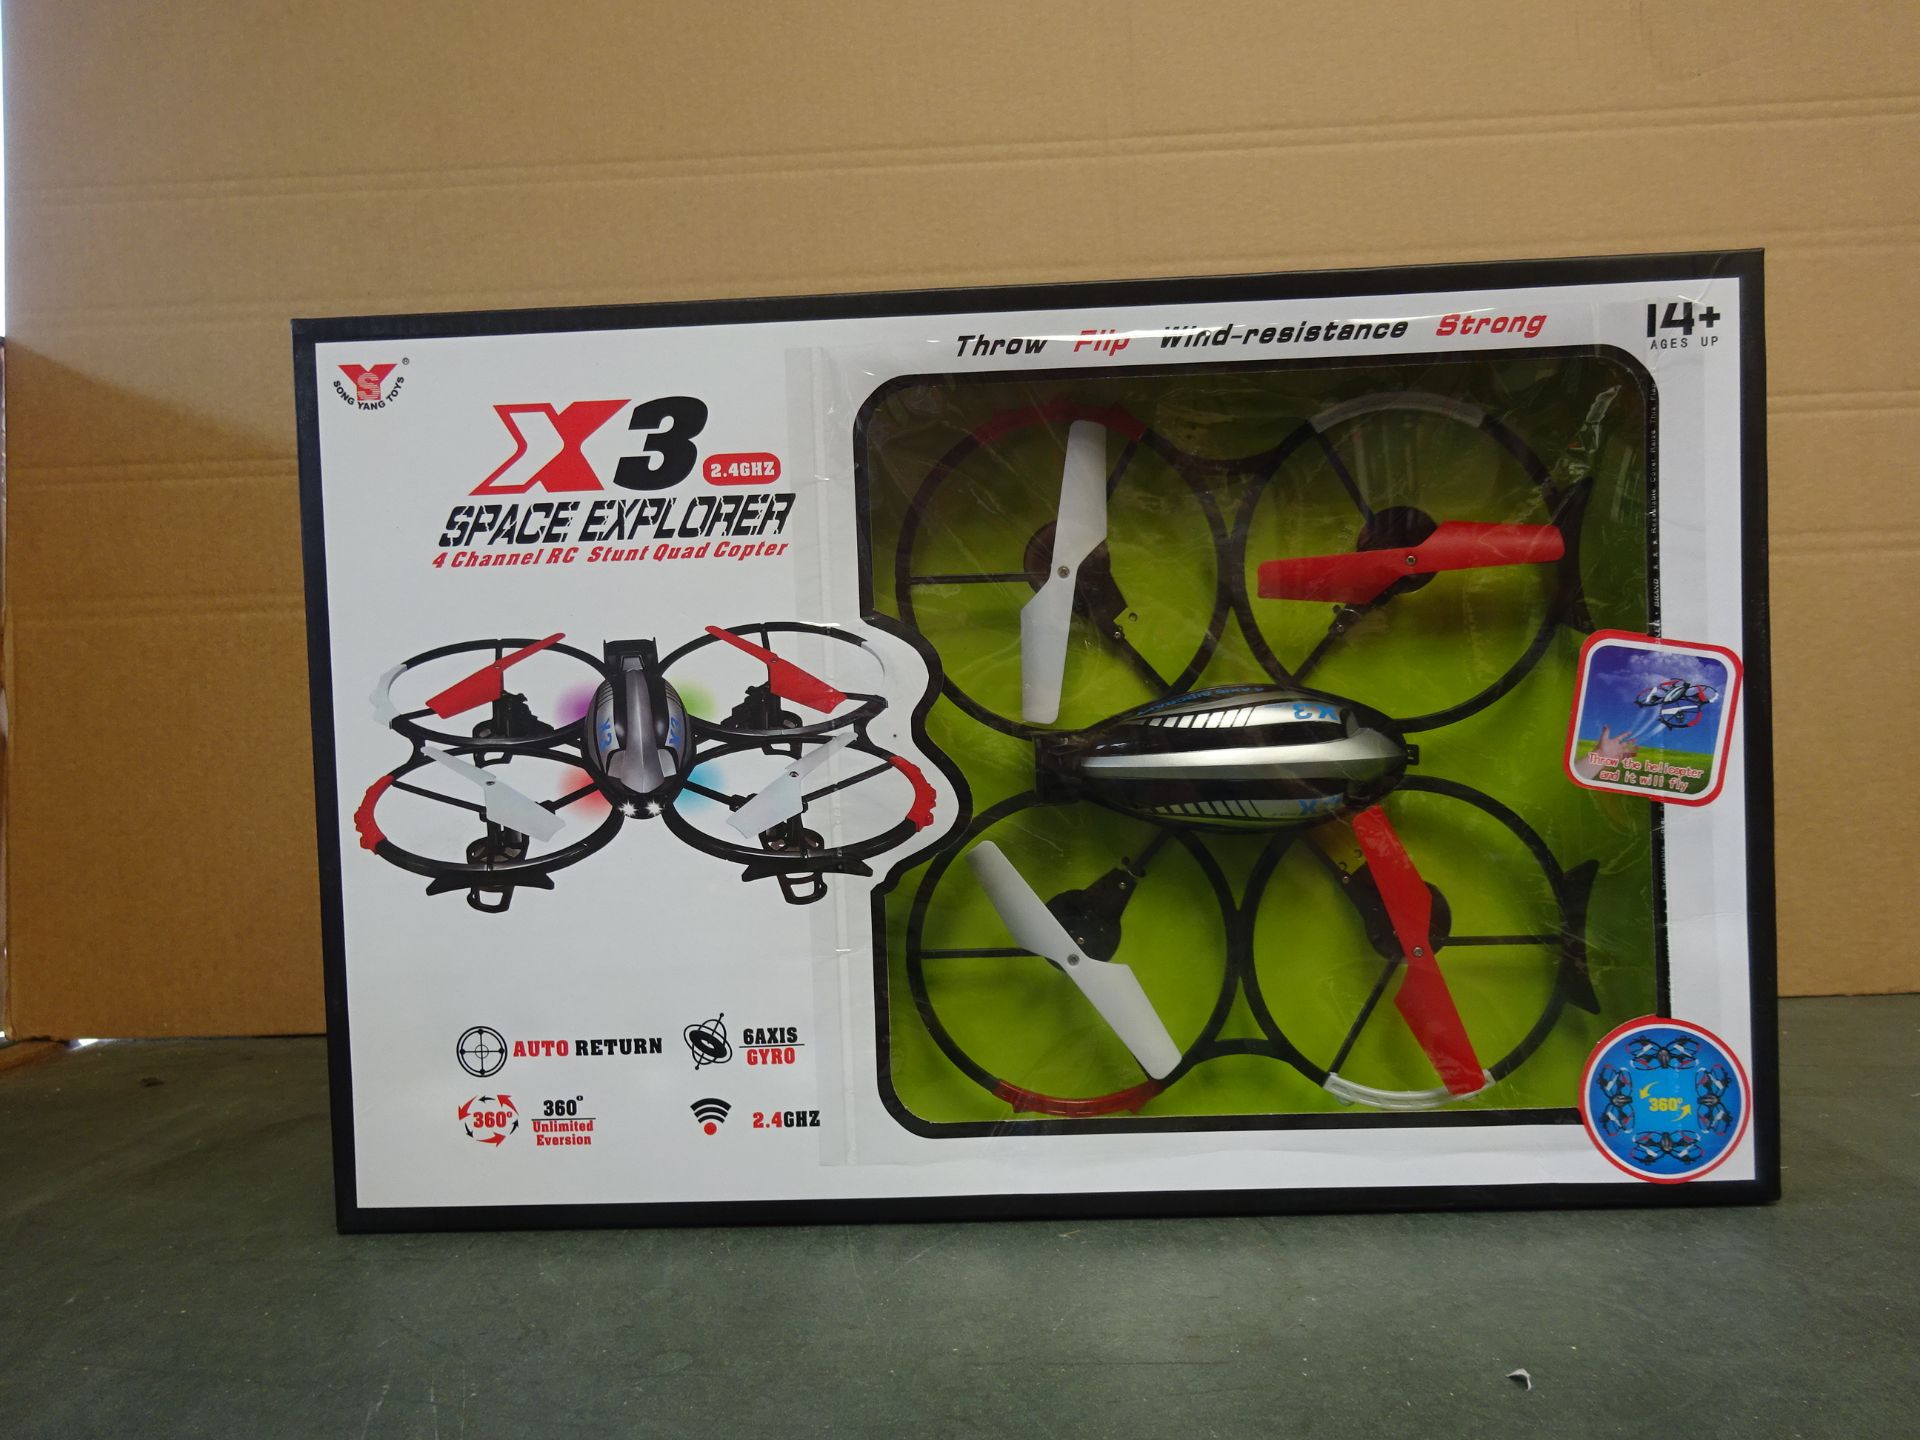 New X3 Space Explorer Drone